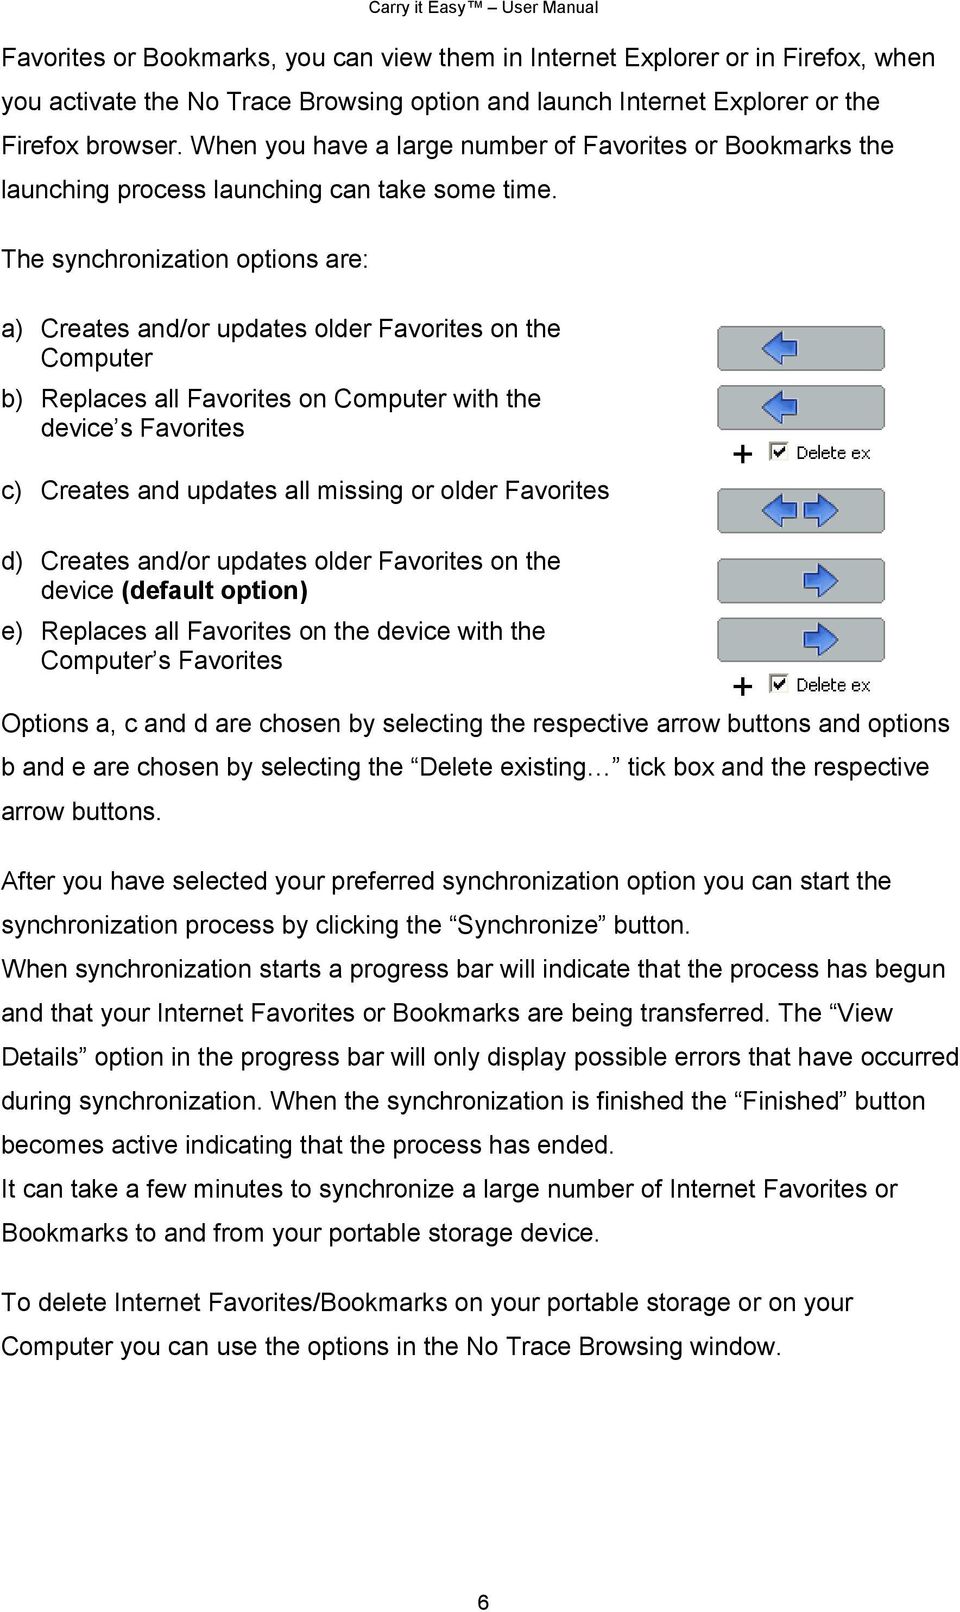 The synchronization options are: a) Creates and/or updates older Favorites on the Computer b) Replaces all Favorites on Computer with the device s Favorites c) Creates and updates all missing or